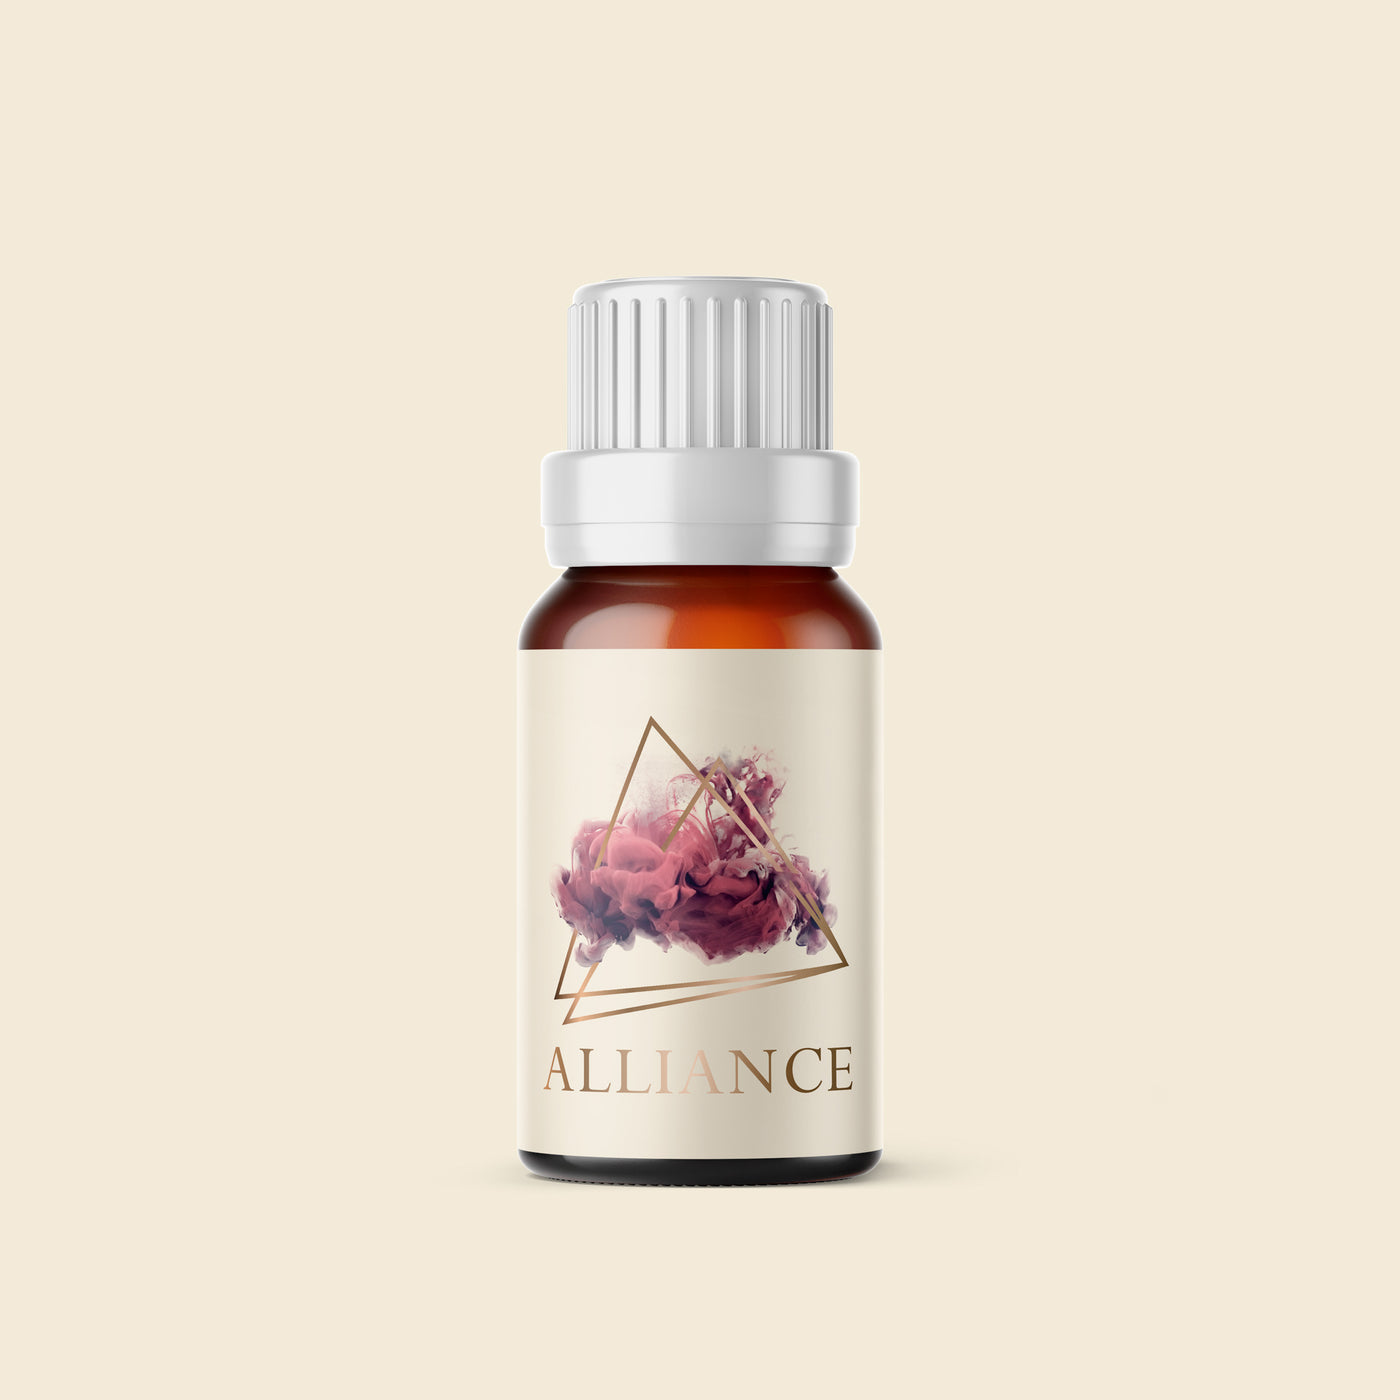 Alliance - Synergie aromatique 100% pure